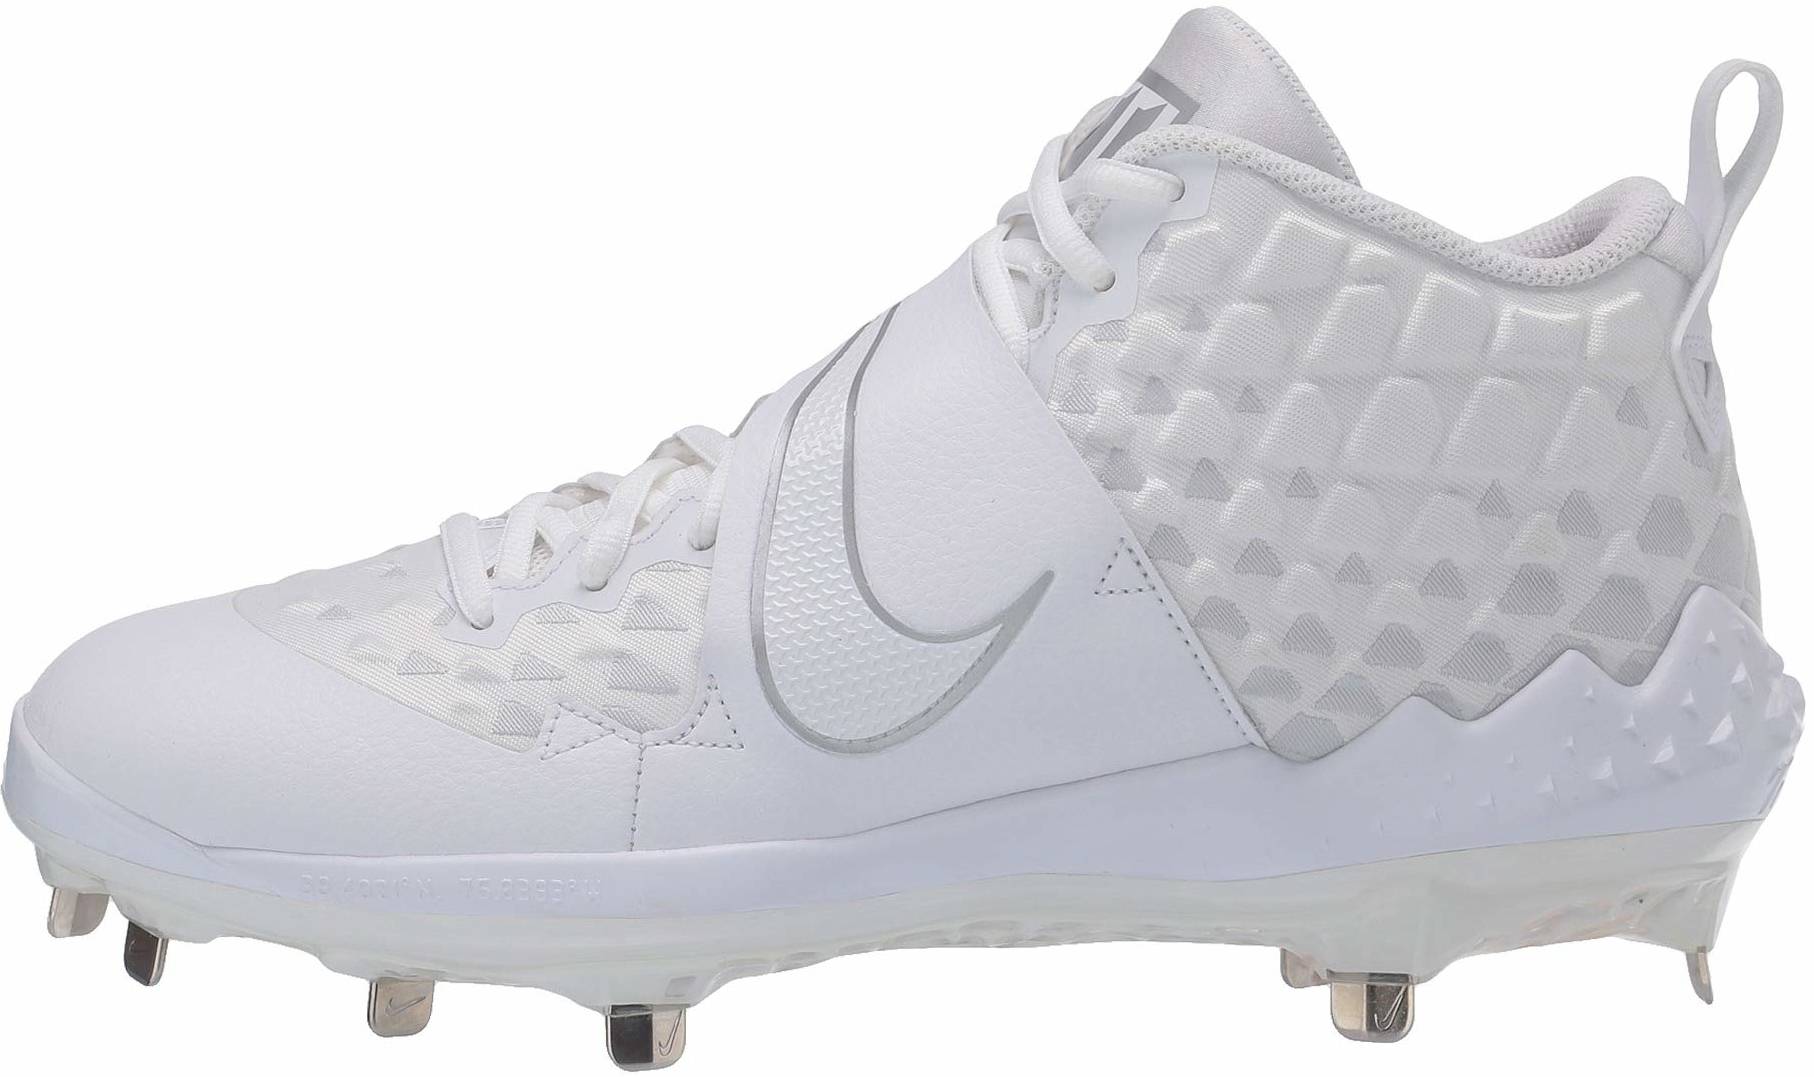 mike trout zoom 6